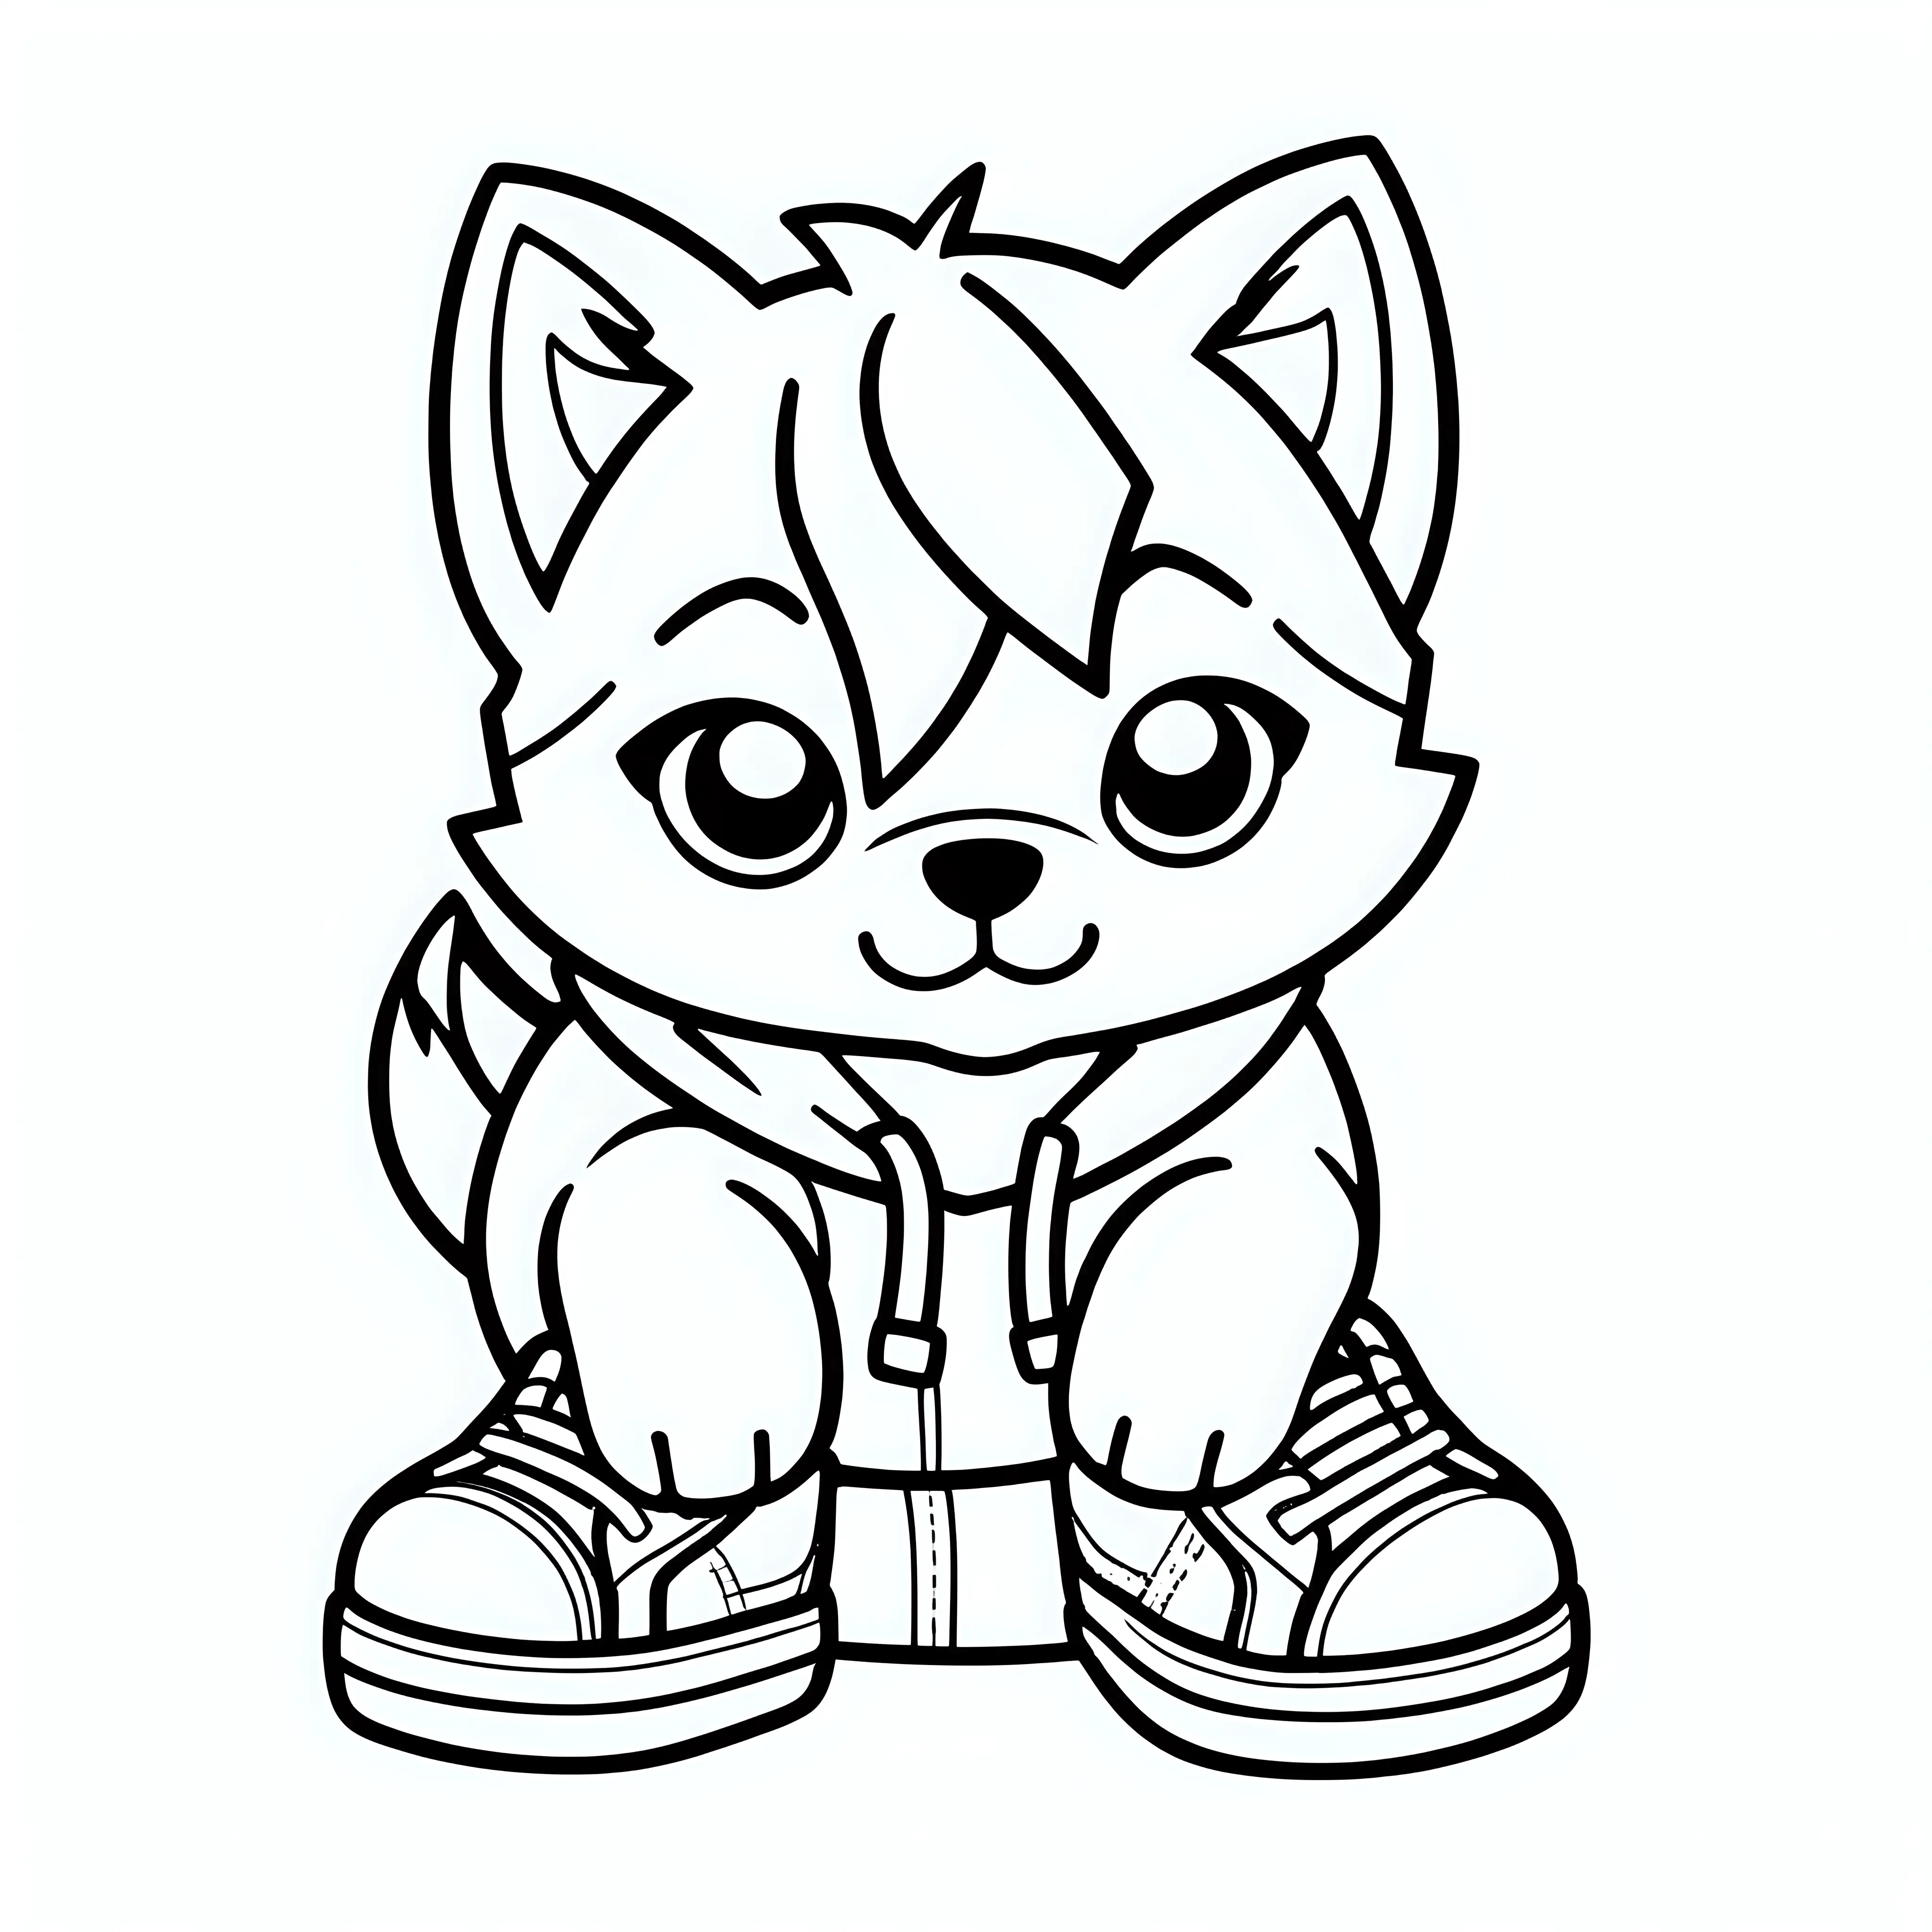 Adorable Chibi Kawaii Baby Husky Coloring Page in a Sneaker